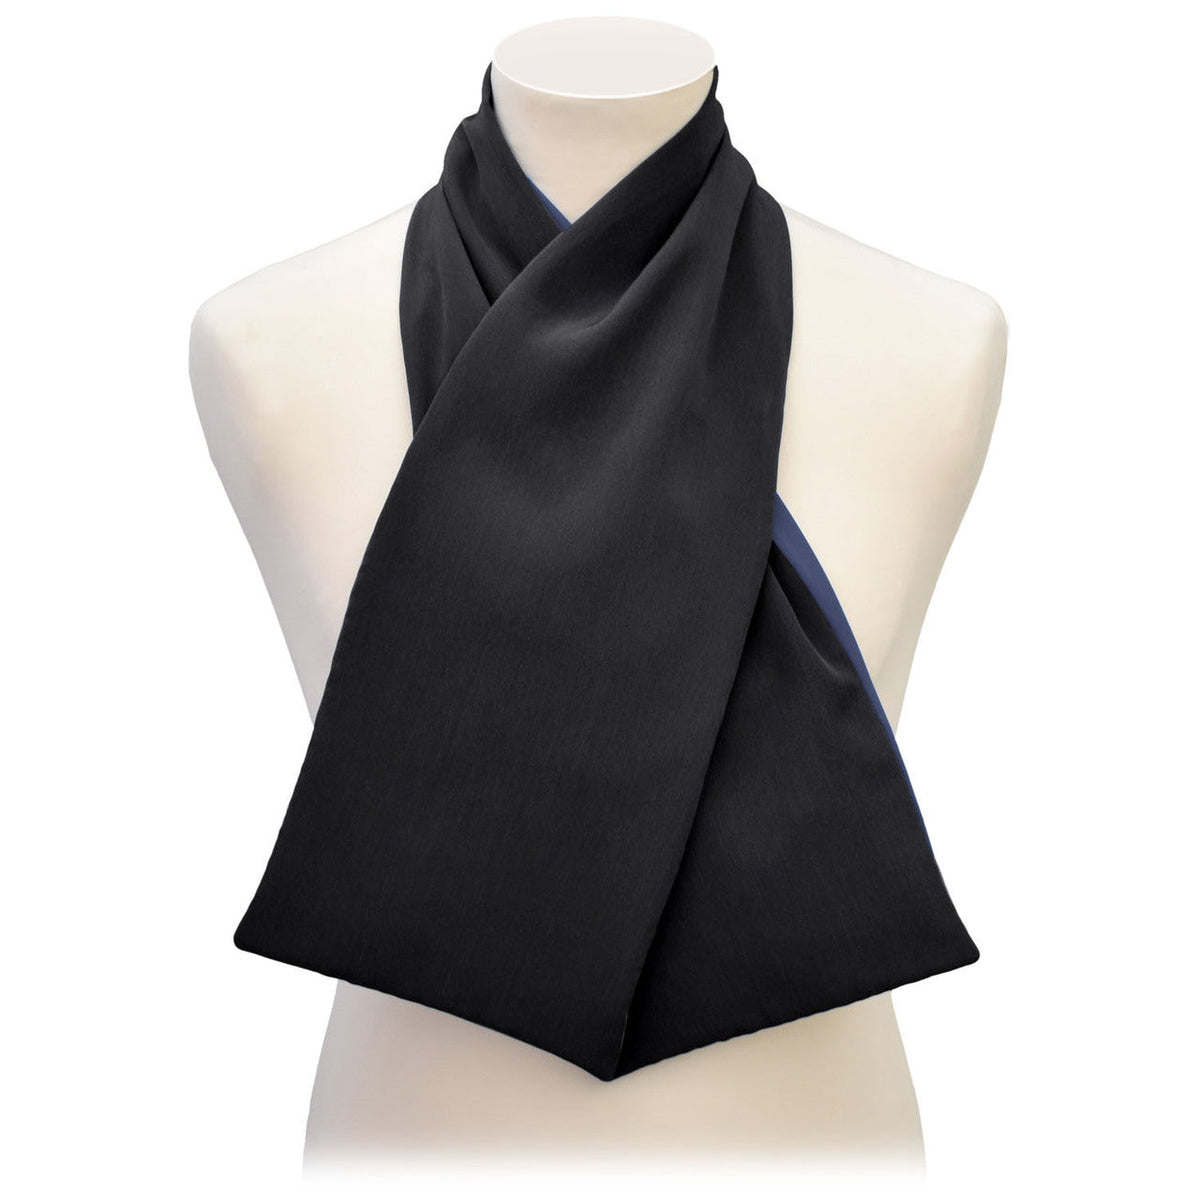 Cross Scarf Clothing Protector - Charcoal Black (UK VAT Exempt) | Health Care | Care Designs